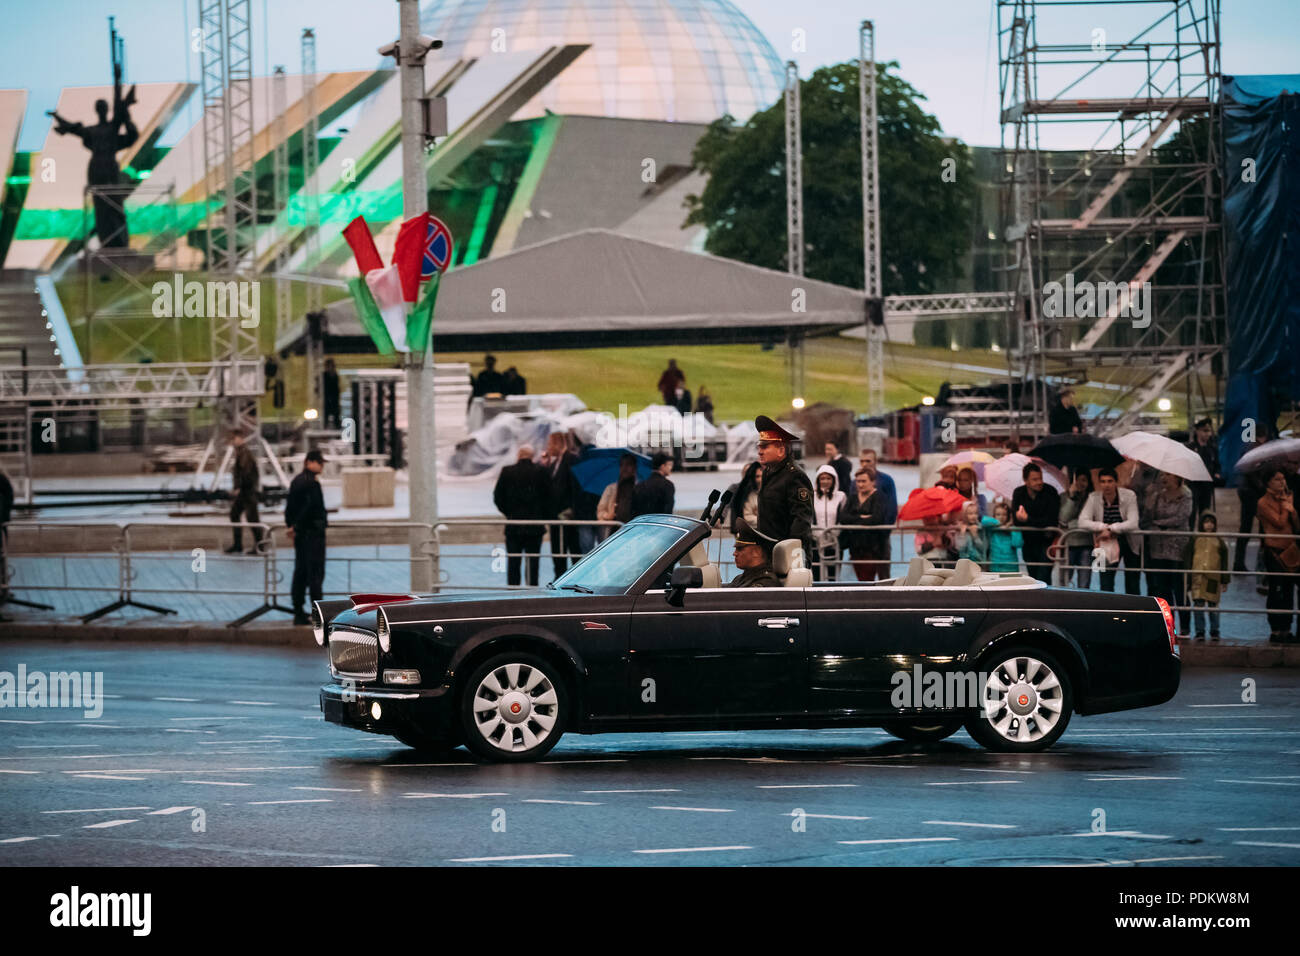 Minsk, Belarus- June 28, 2017: Chinese Cabriolet Faw Hongqi L5 Moving At Street During Night Rehearsal Of Parade Before Celebration Of Independence Da Stock Photo